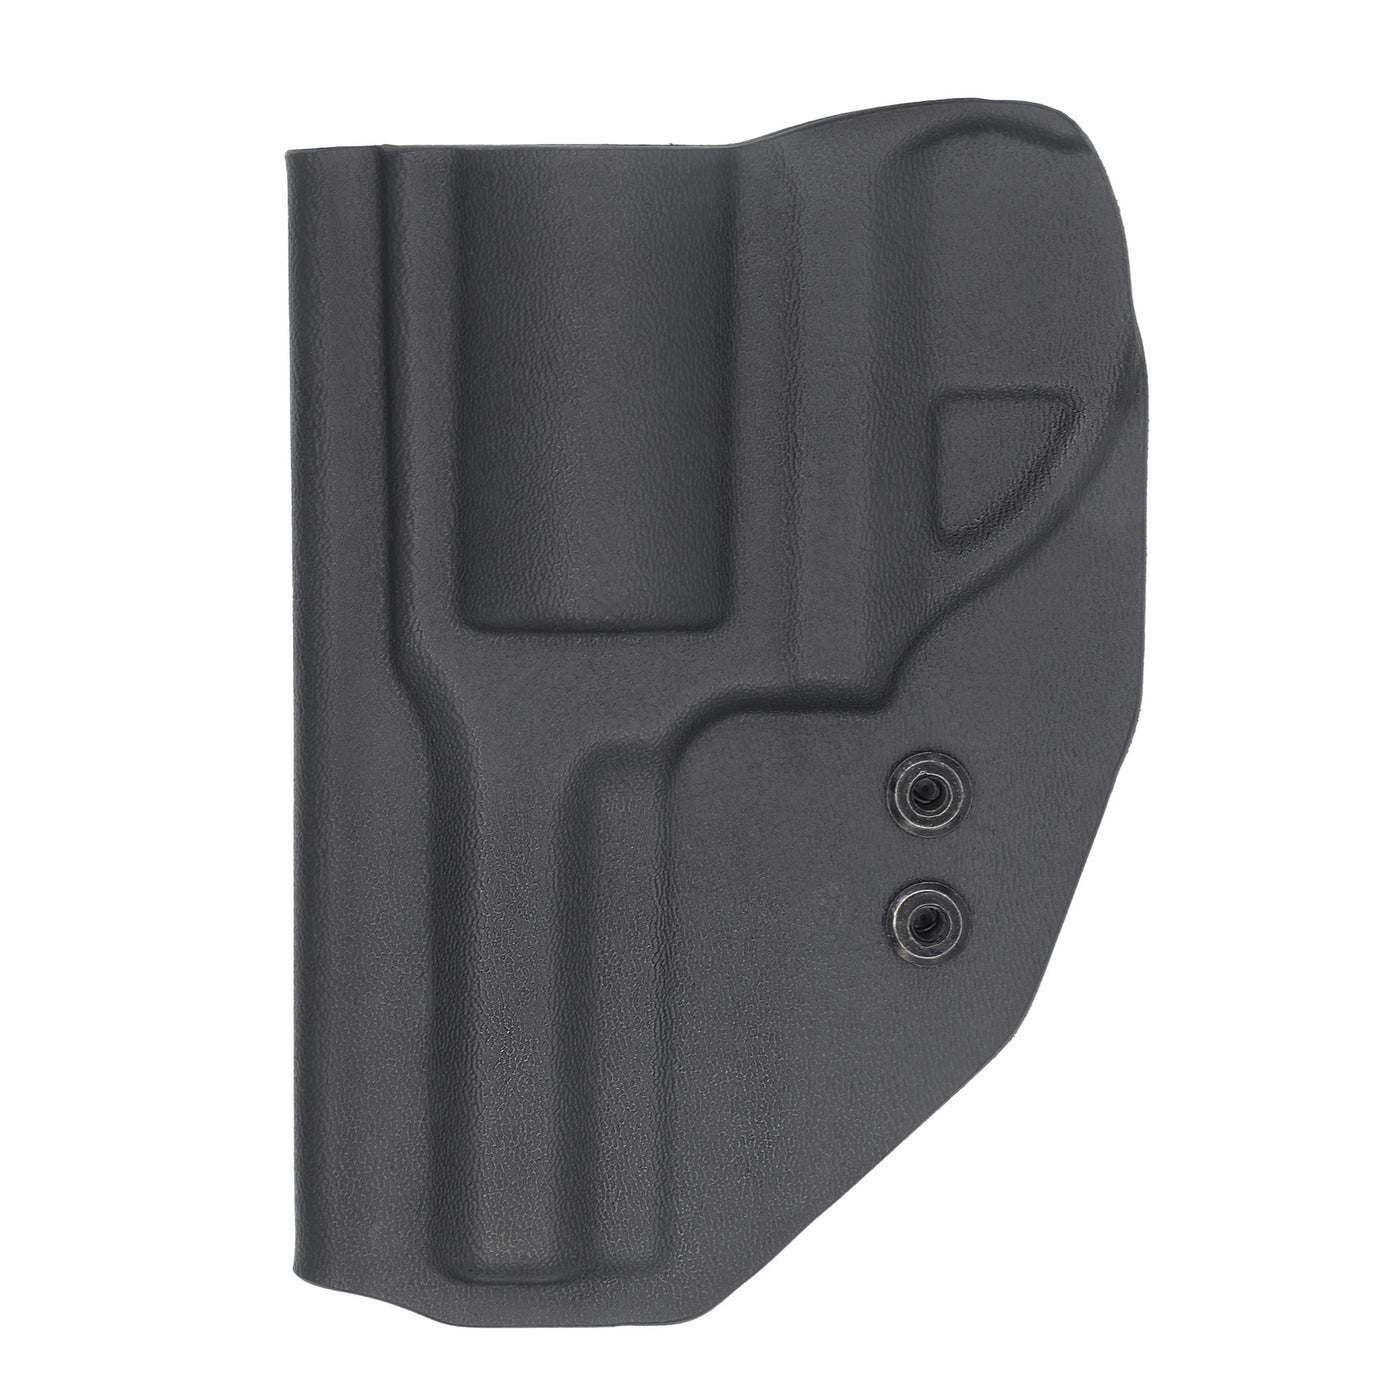 This is the C&G Holsters Covert series inside the waistband holster for the Ruger LCR revolver in right hand, black in color and rear view.